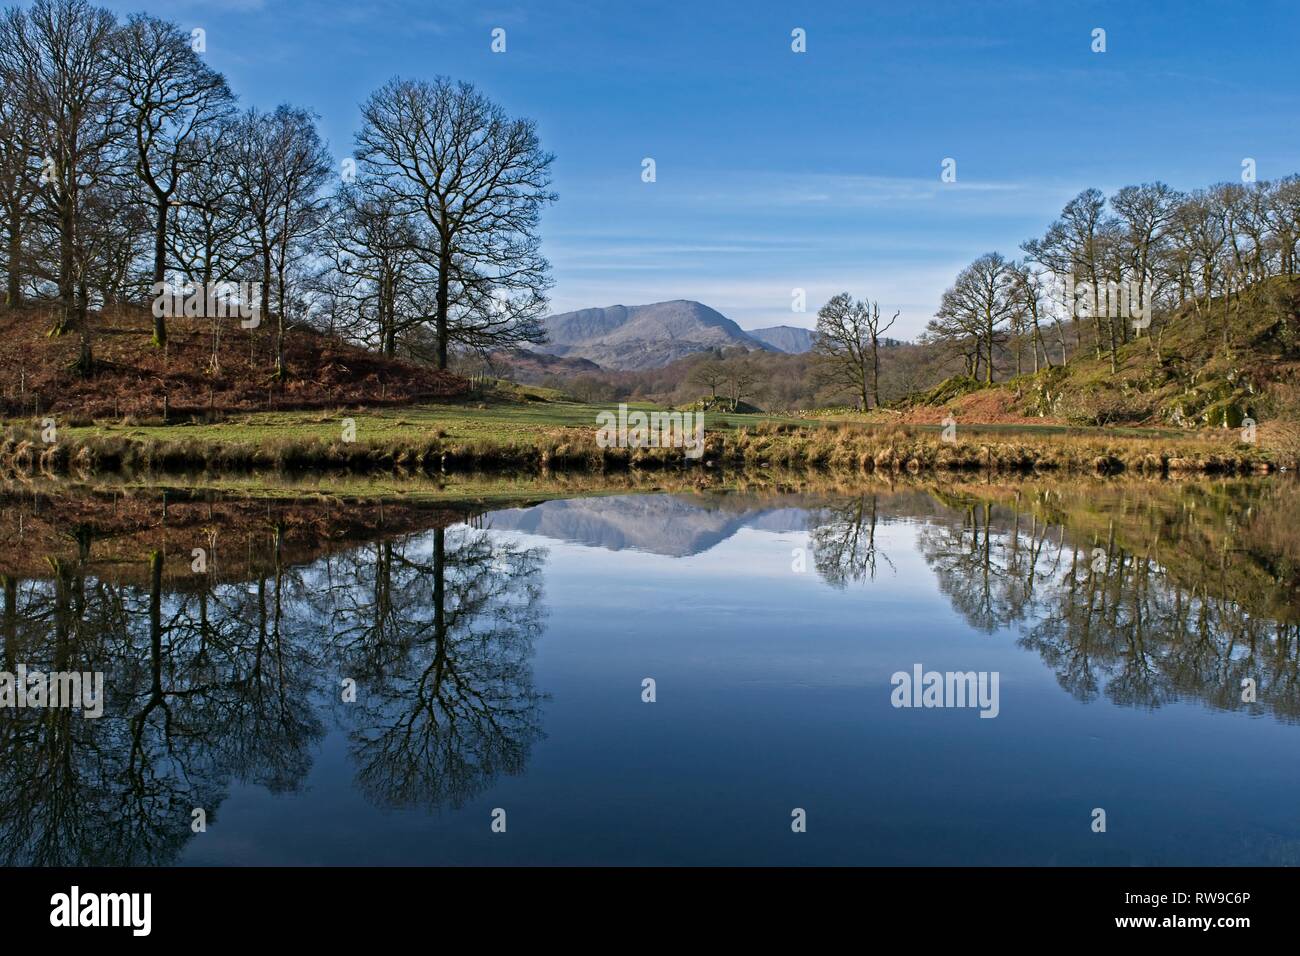 Mirror-like reflections of Wetherlam and the Coniston fells on the River Brathay near Elterwater Stock Photo